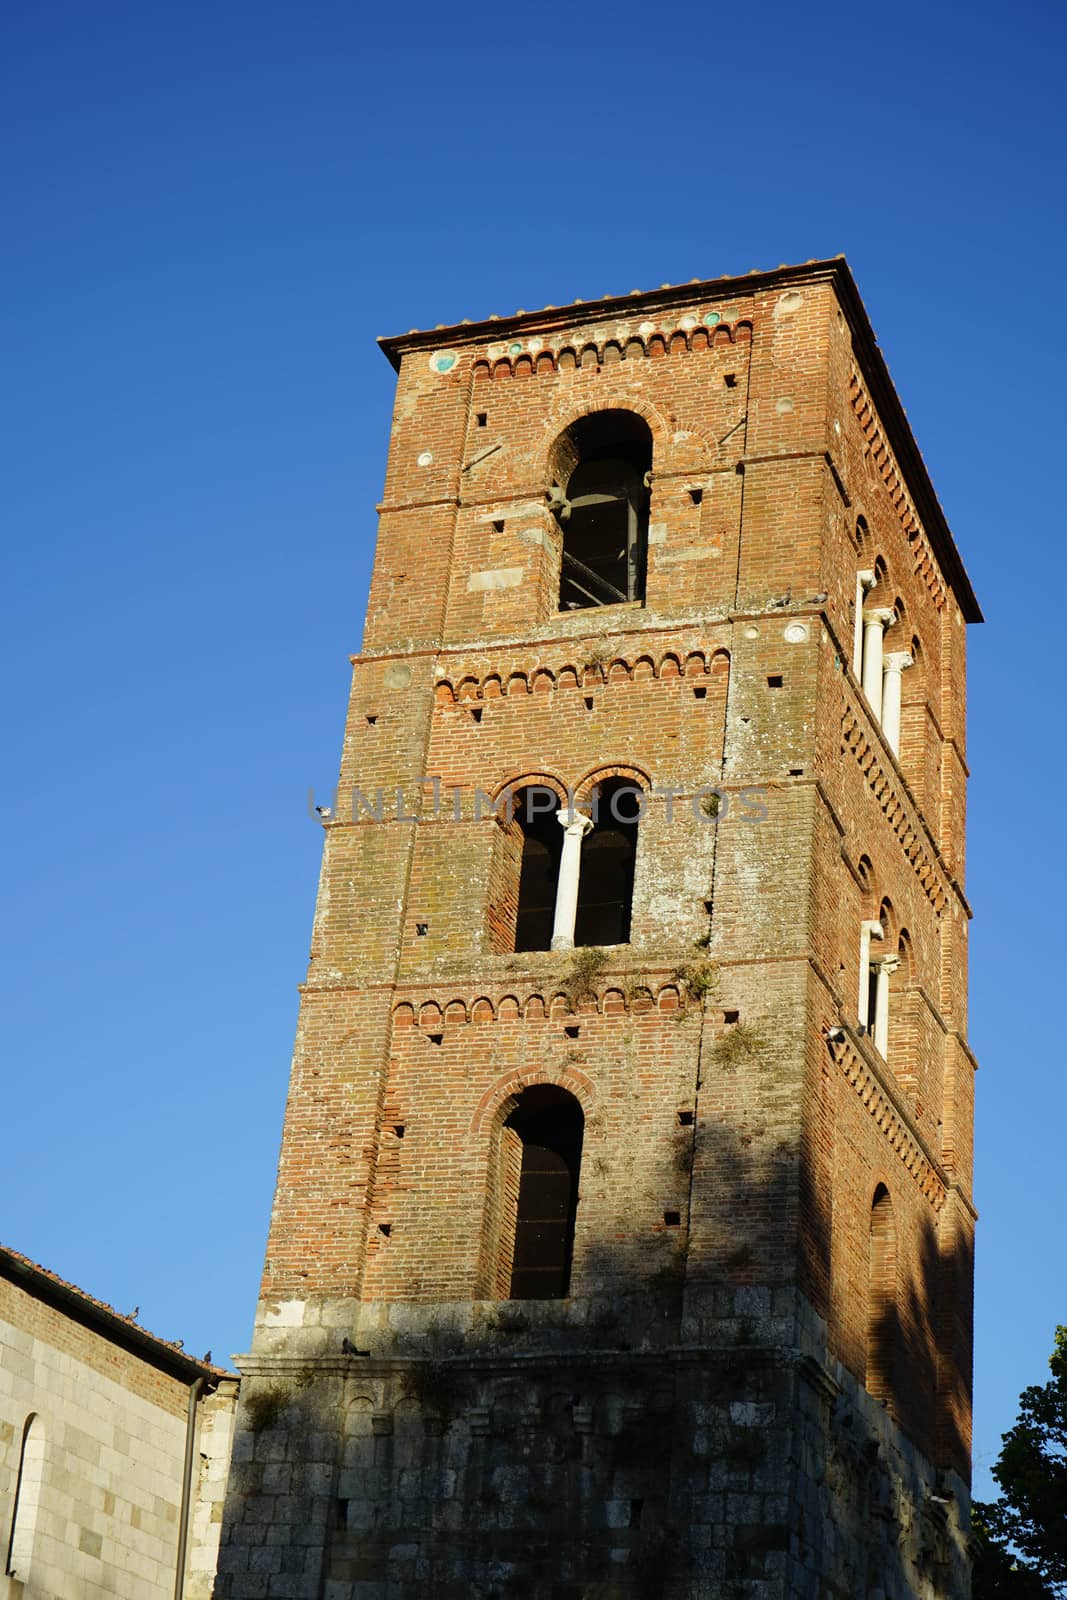 The leaning bell tower of the Church of San Michele degli Scalzi, Pisa - Tuscany, Italy